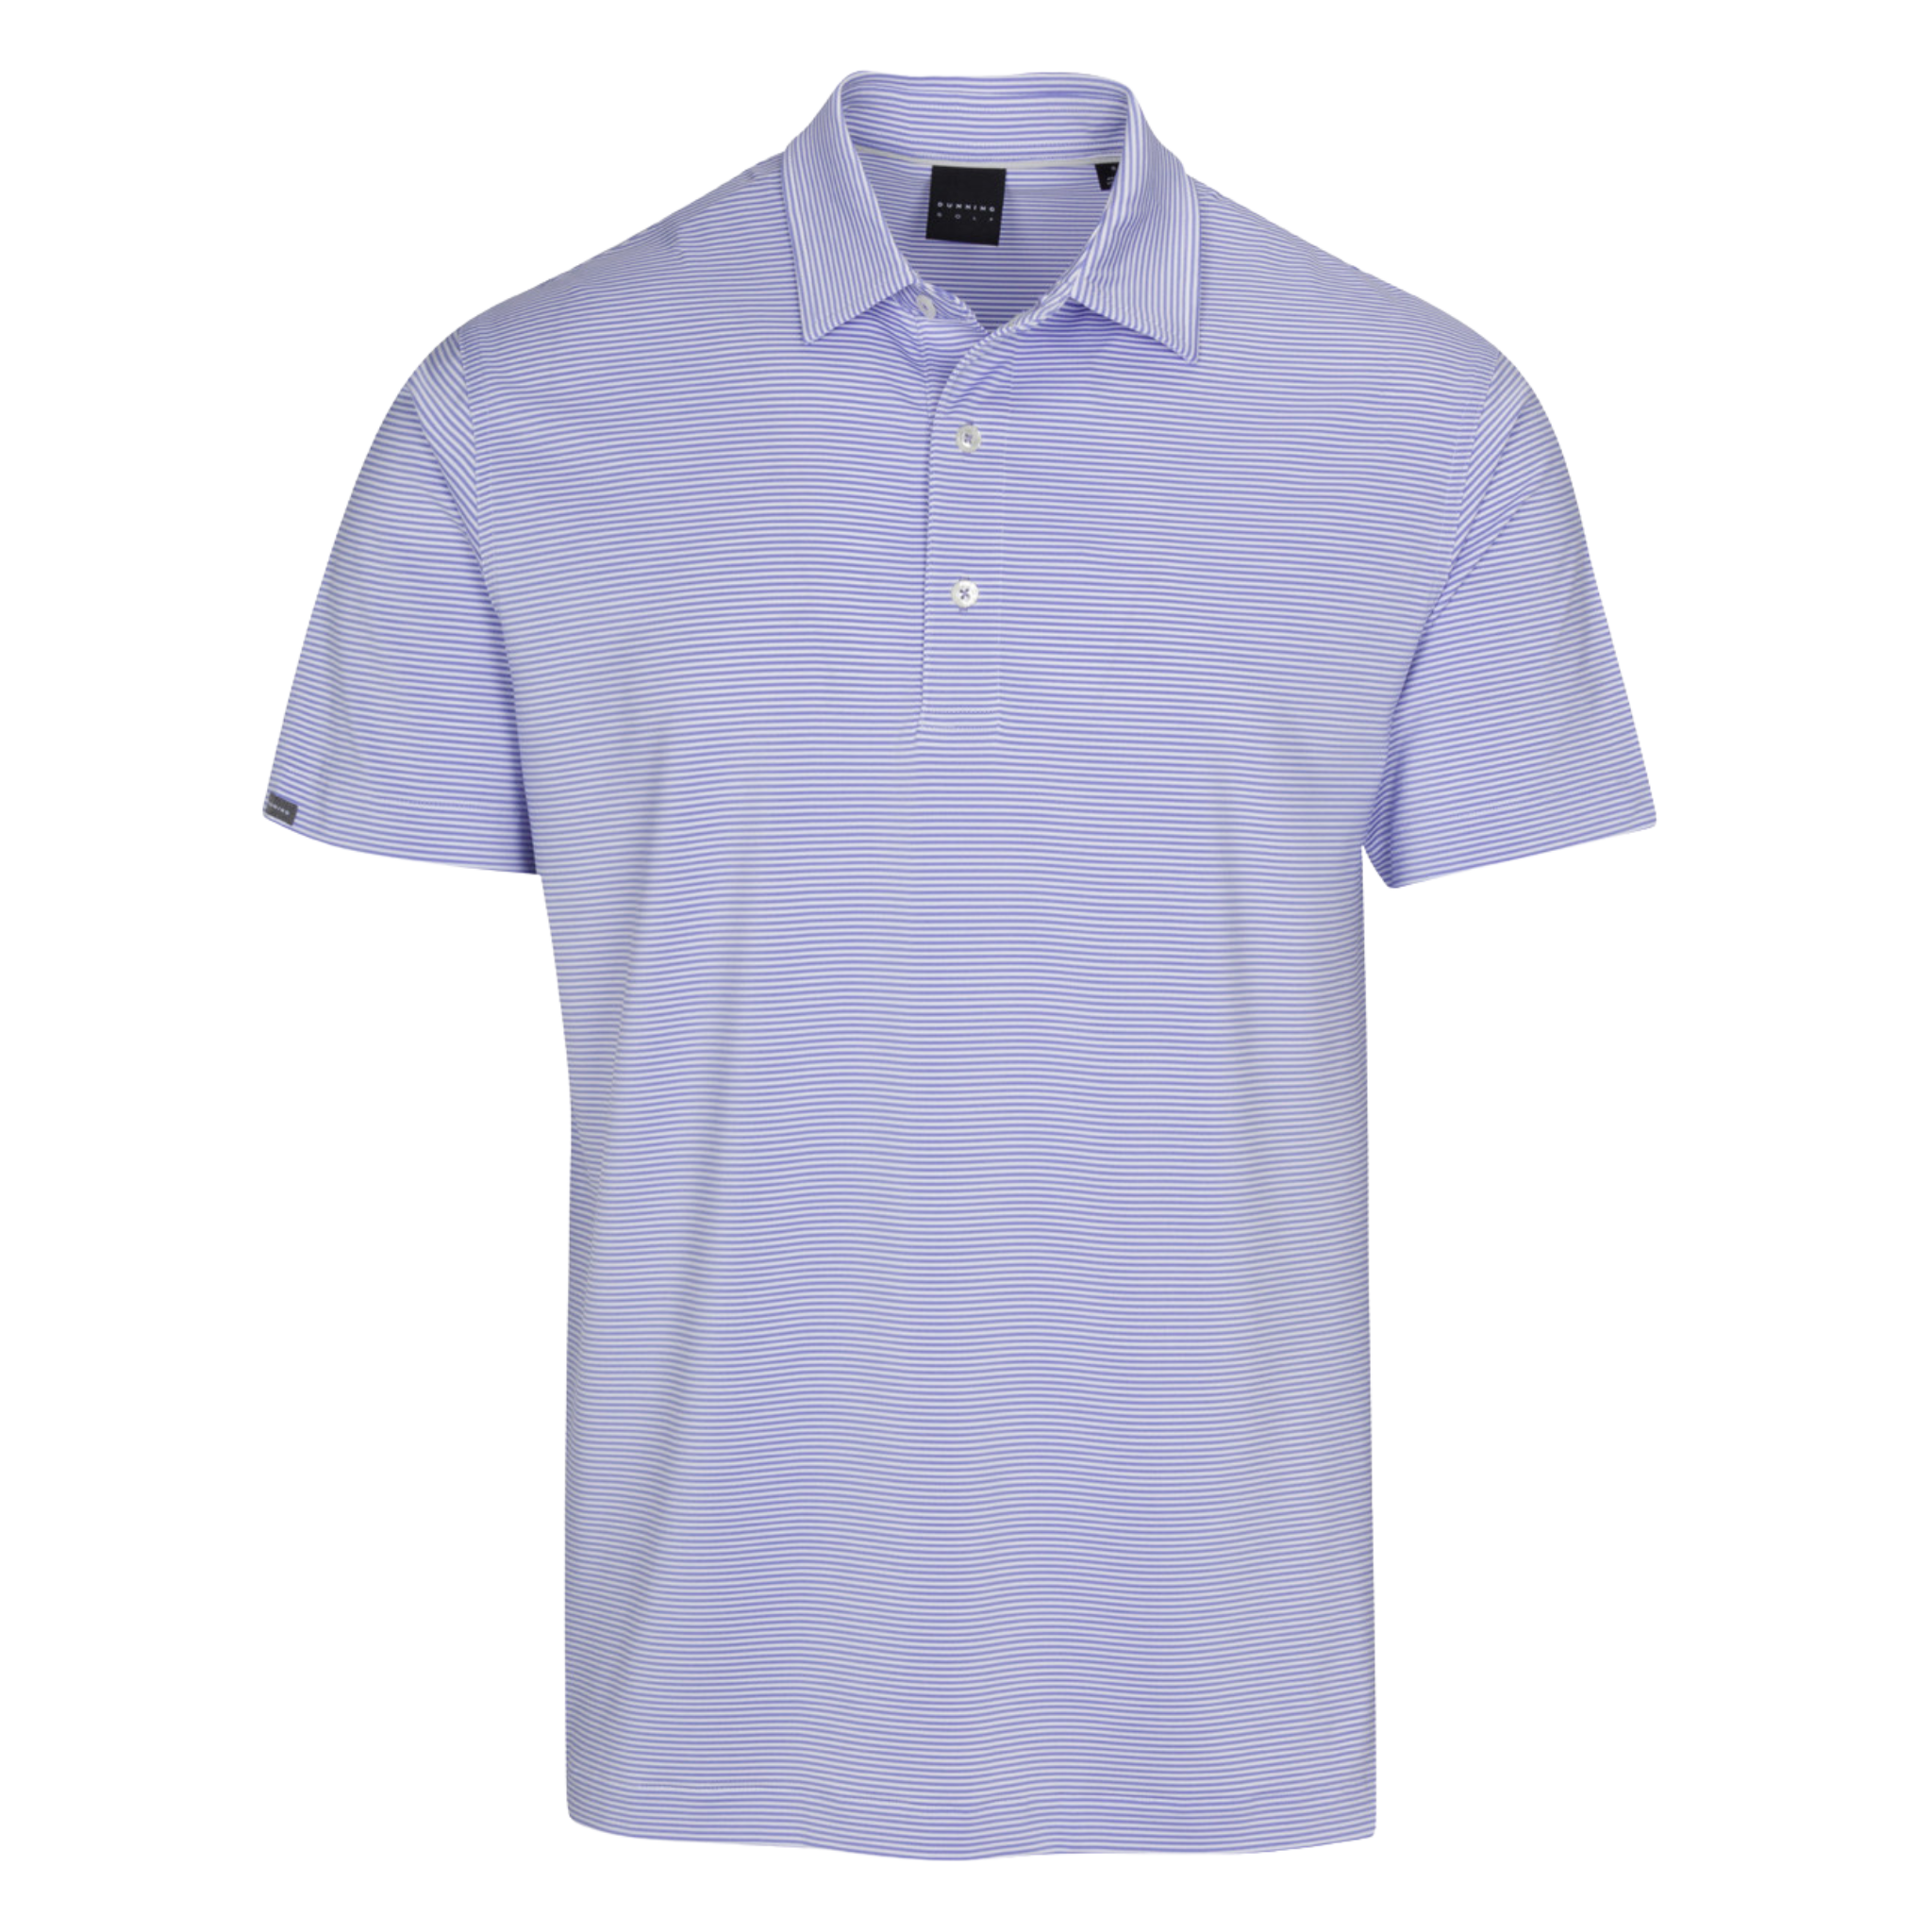 Helsby Jersey Performance Polo